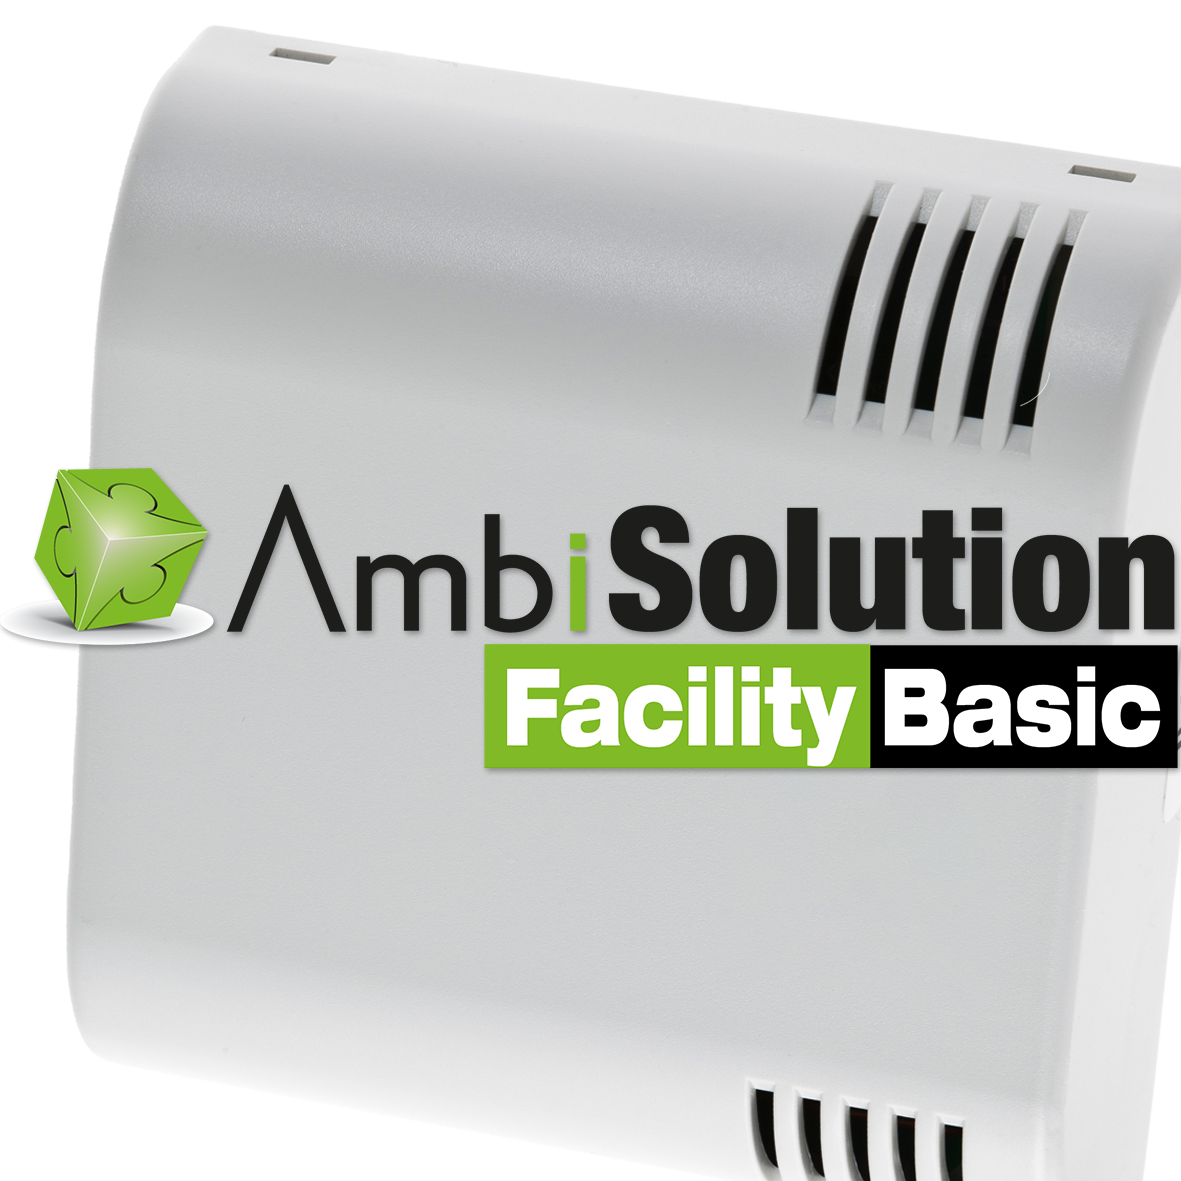 AmbiSolution Facility